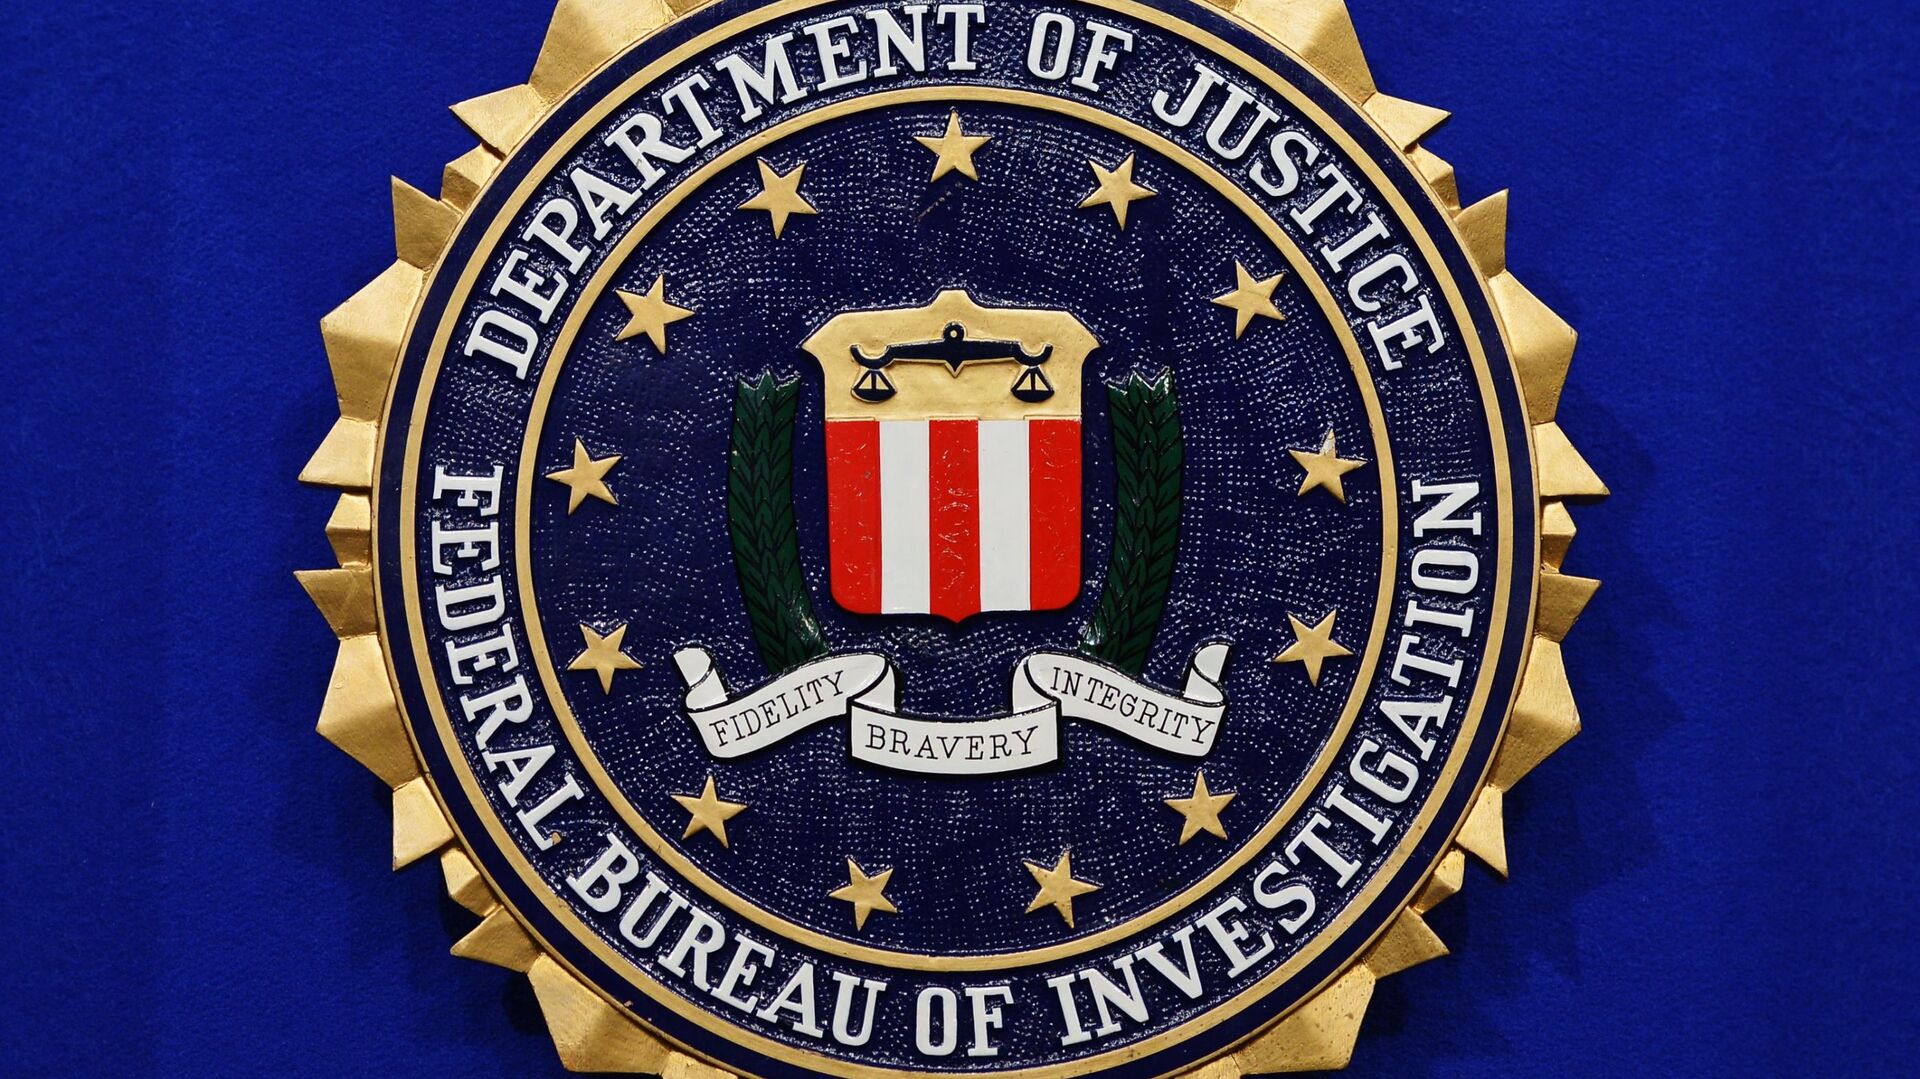 The Federal Bureau of Investigation (FBI) seal is seen on the lectern following a press conference announcing the FBI's 499th and 500th additions to the Ten Most Wanted Fugitives list on June 17, 2013 at the Newseum in Washington, DC.  - Sputnik International, 1920, 14.08.2022